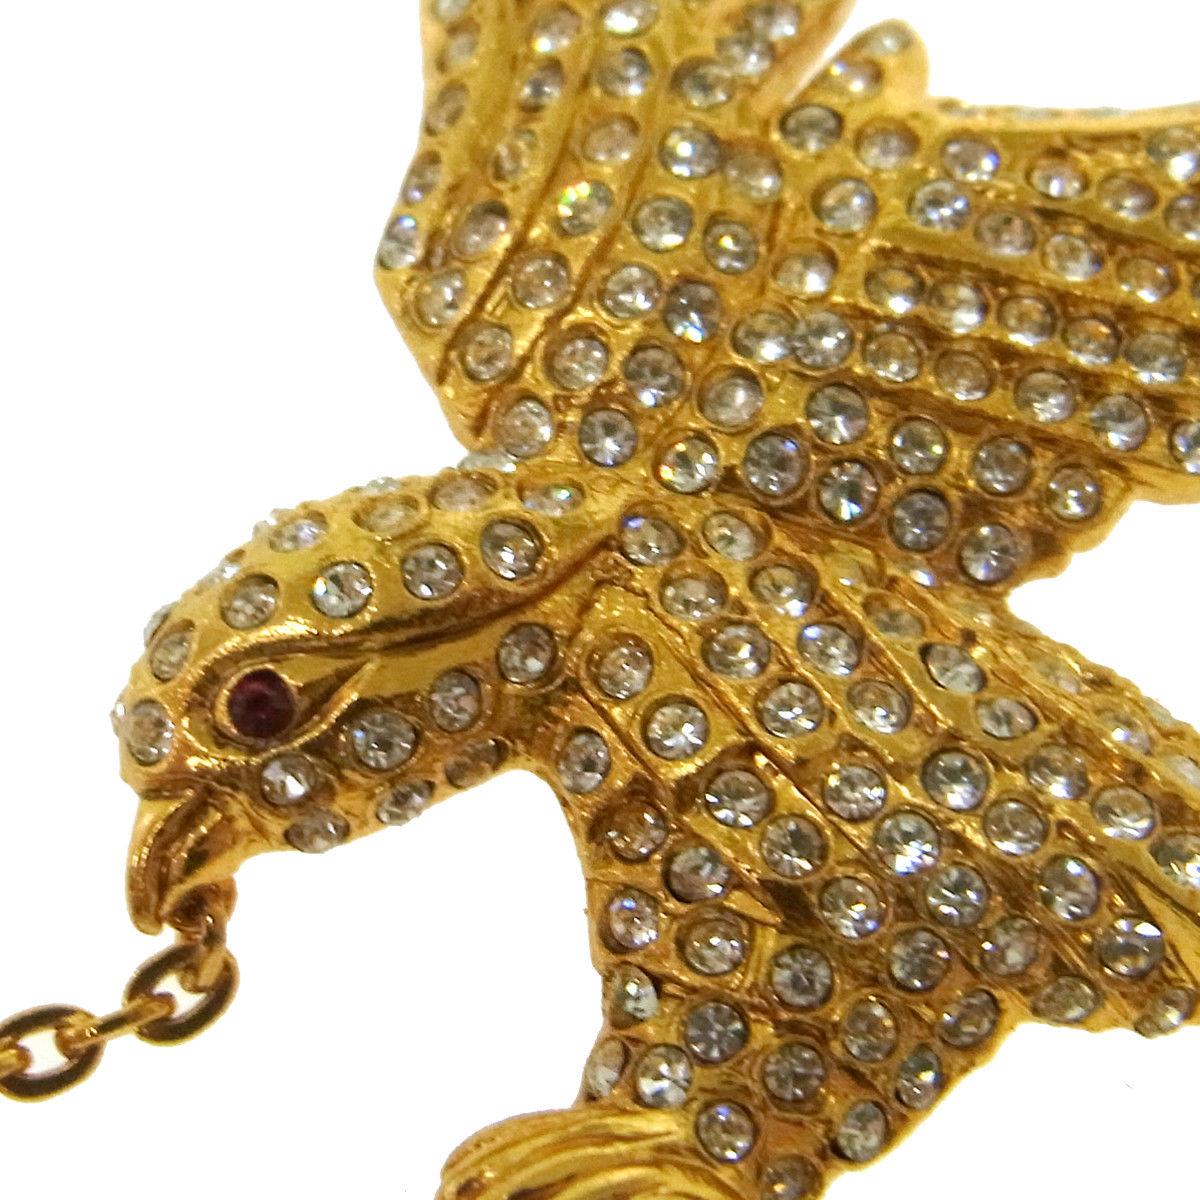 Chanel Rare Gold Crystal Studded Bird Charm Evening Pin Lapel Brooch in Box

Metal
Gold tone hardware
Crystal
Pin closure
Made in France
Measures 2